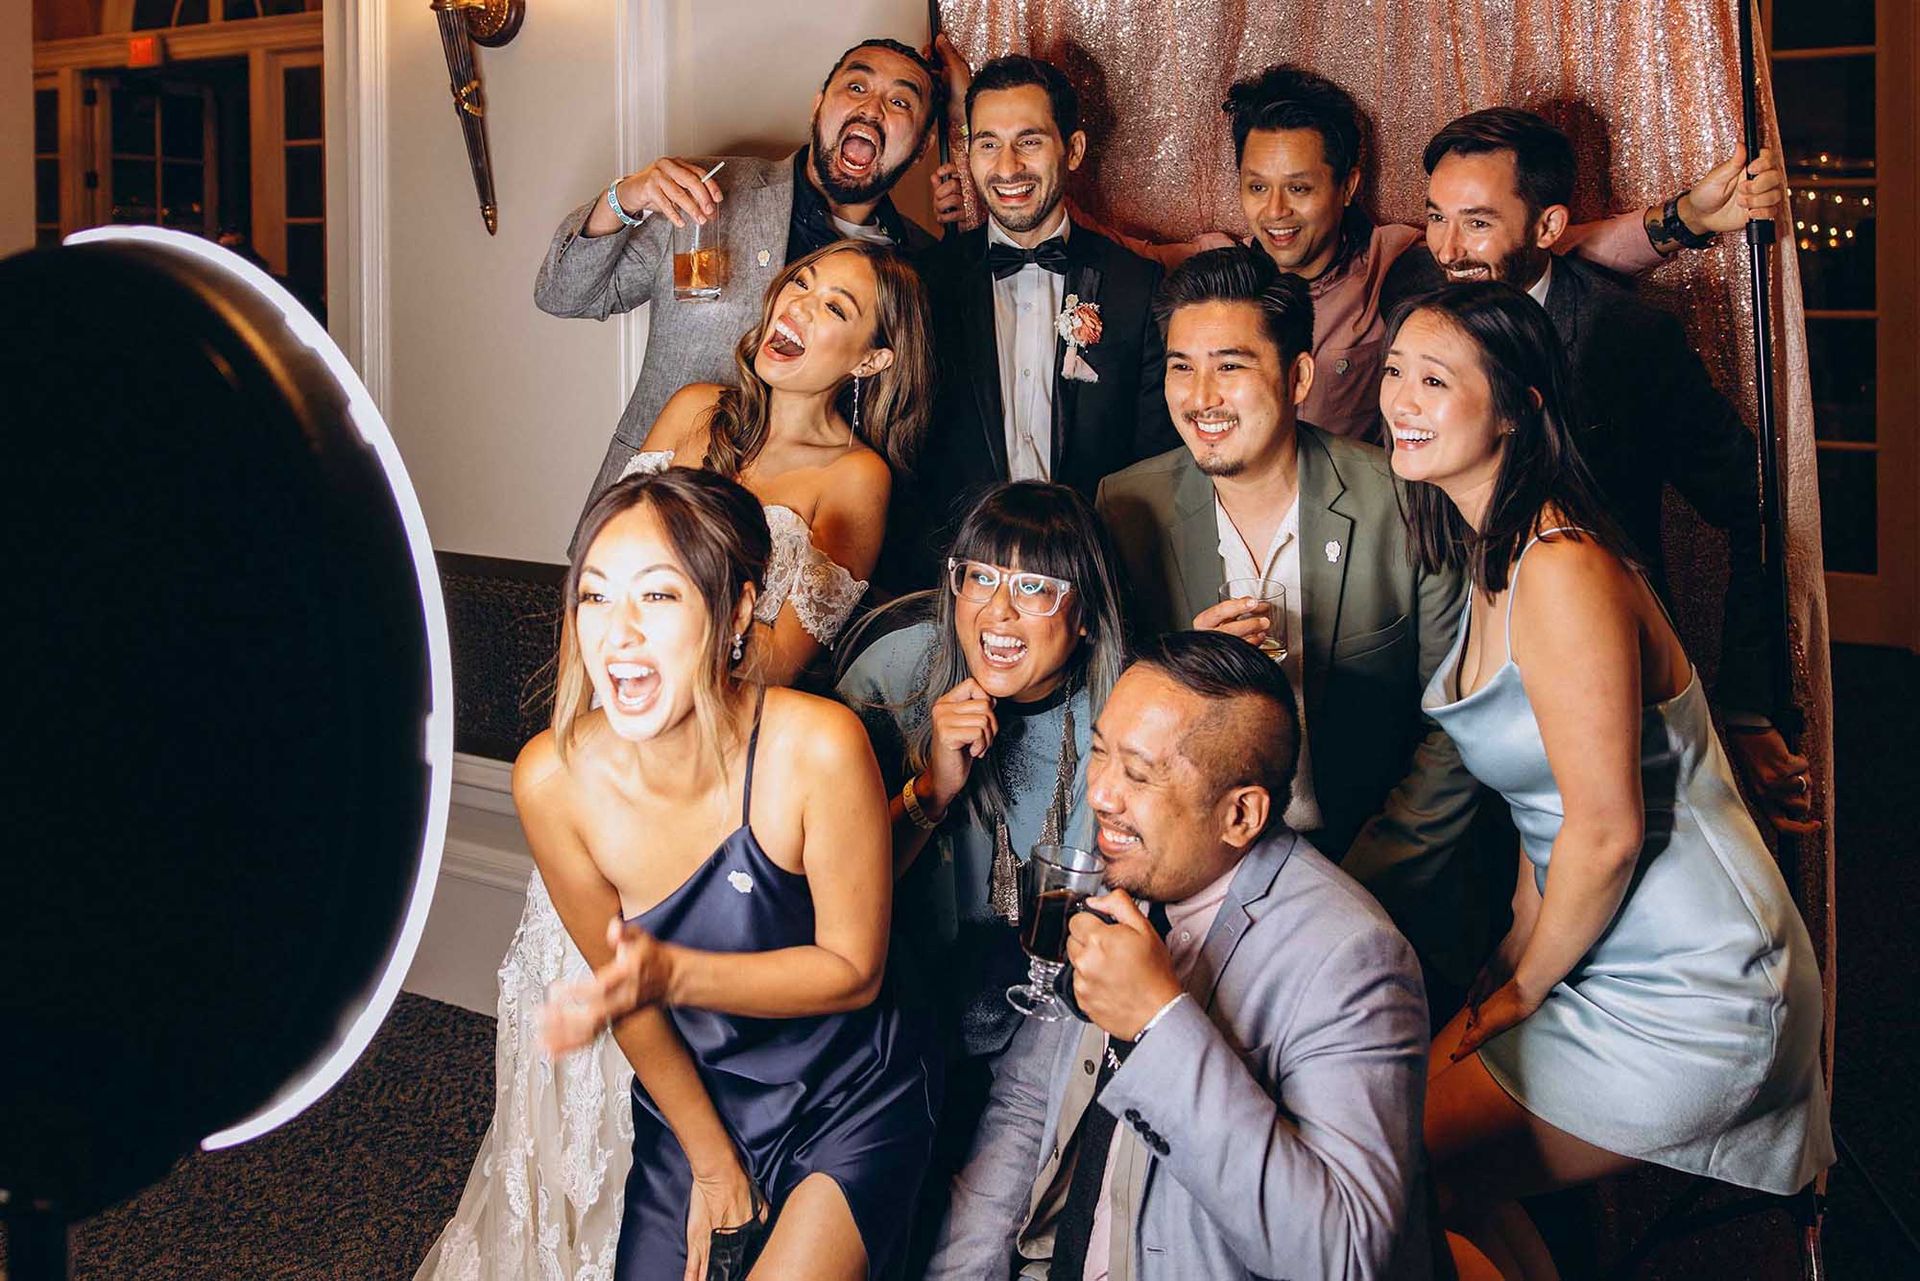 rent our premier photo booth rental in DMV for your next event!